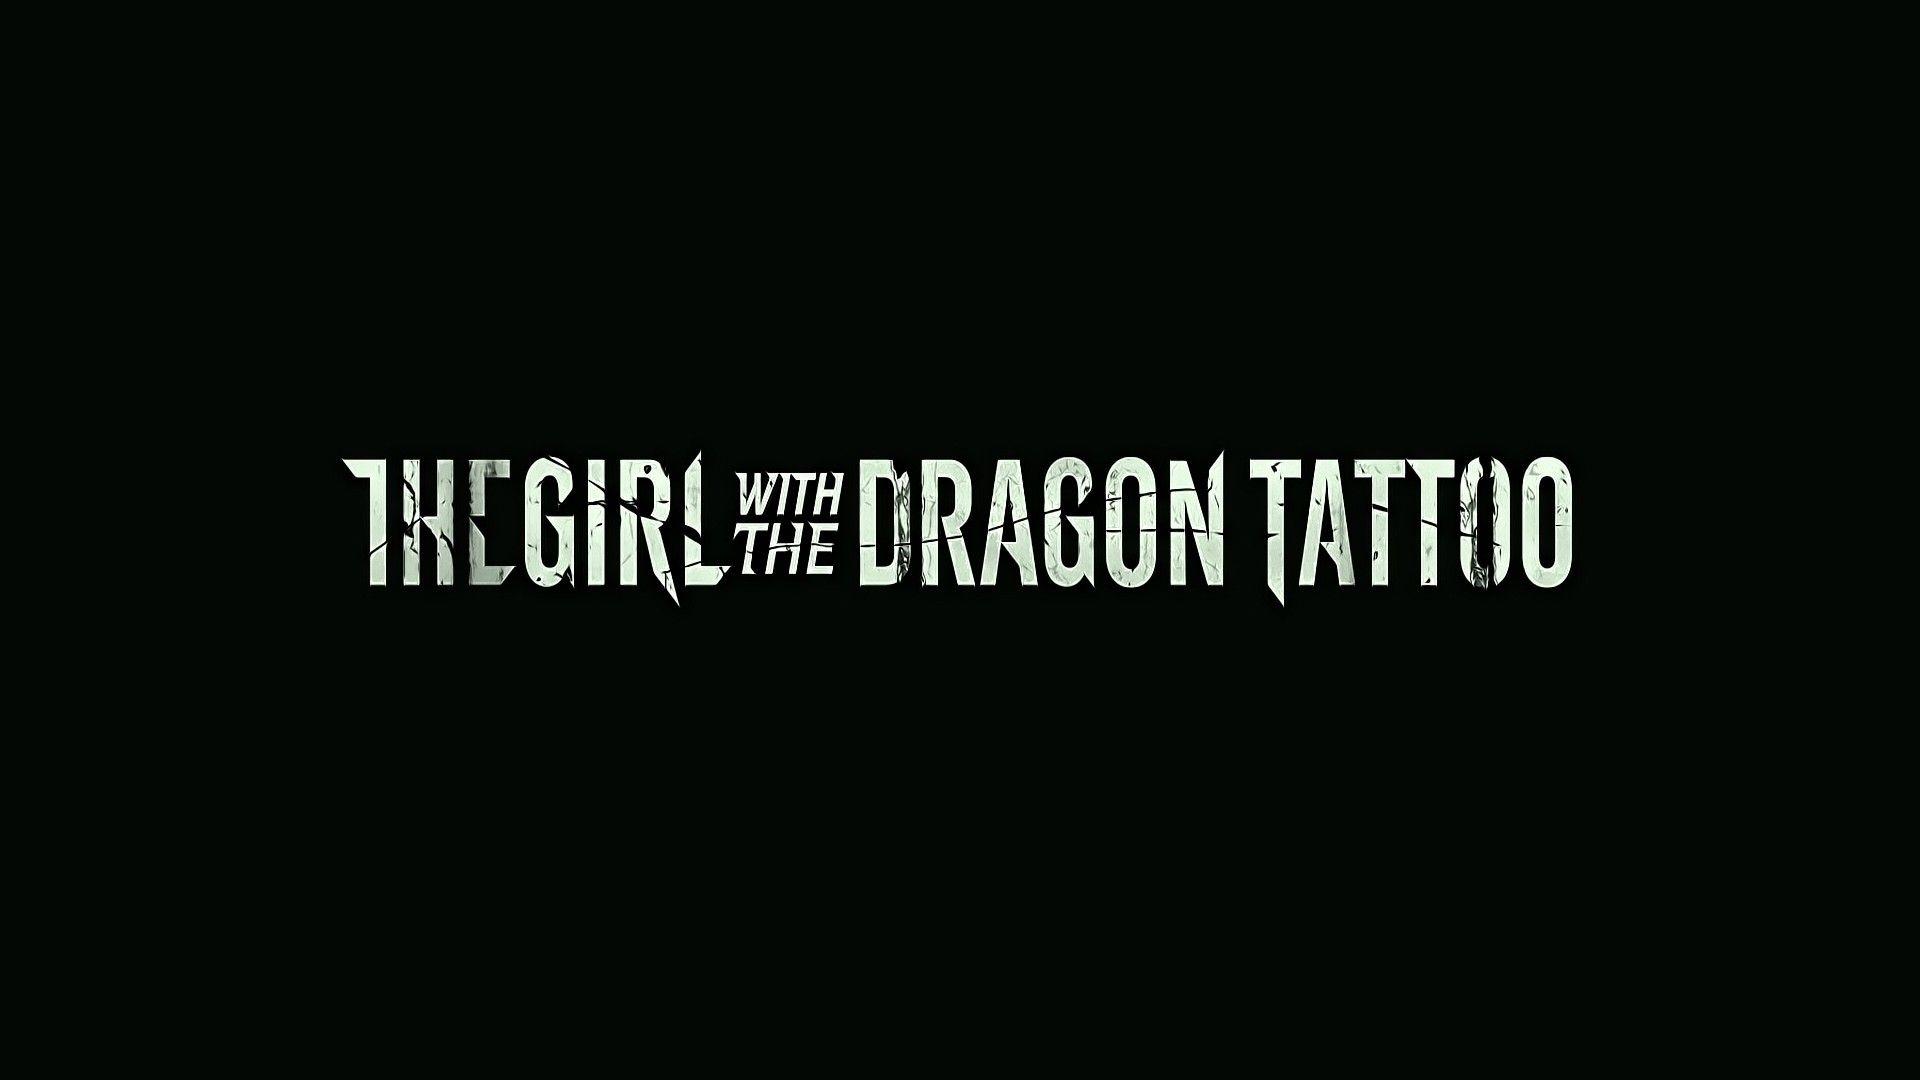 Download the Girl With The Dragon Tattoo Wallpaper, Girl With